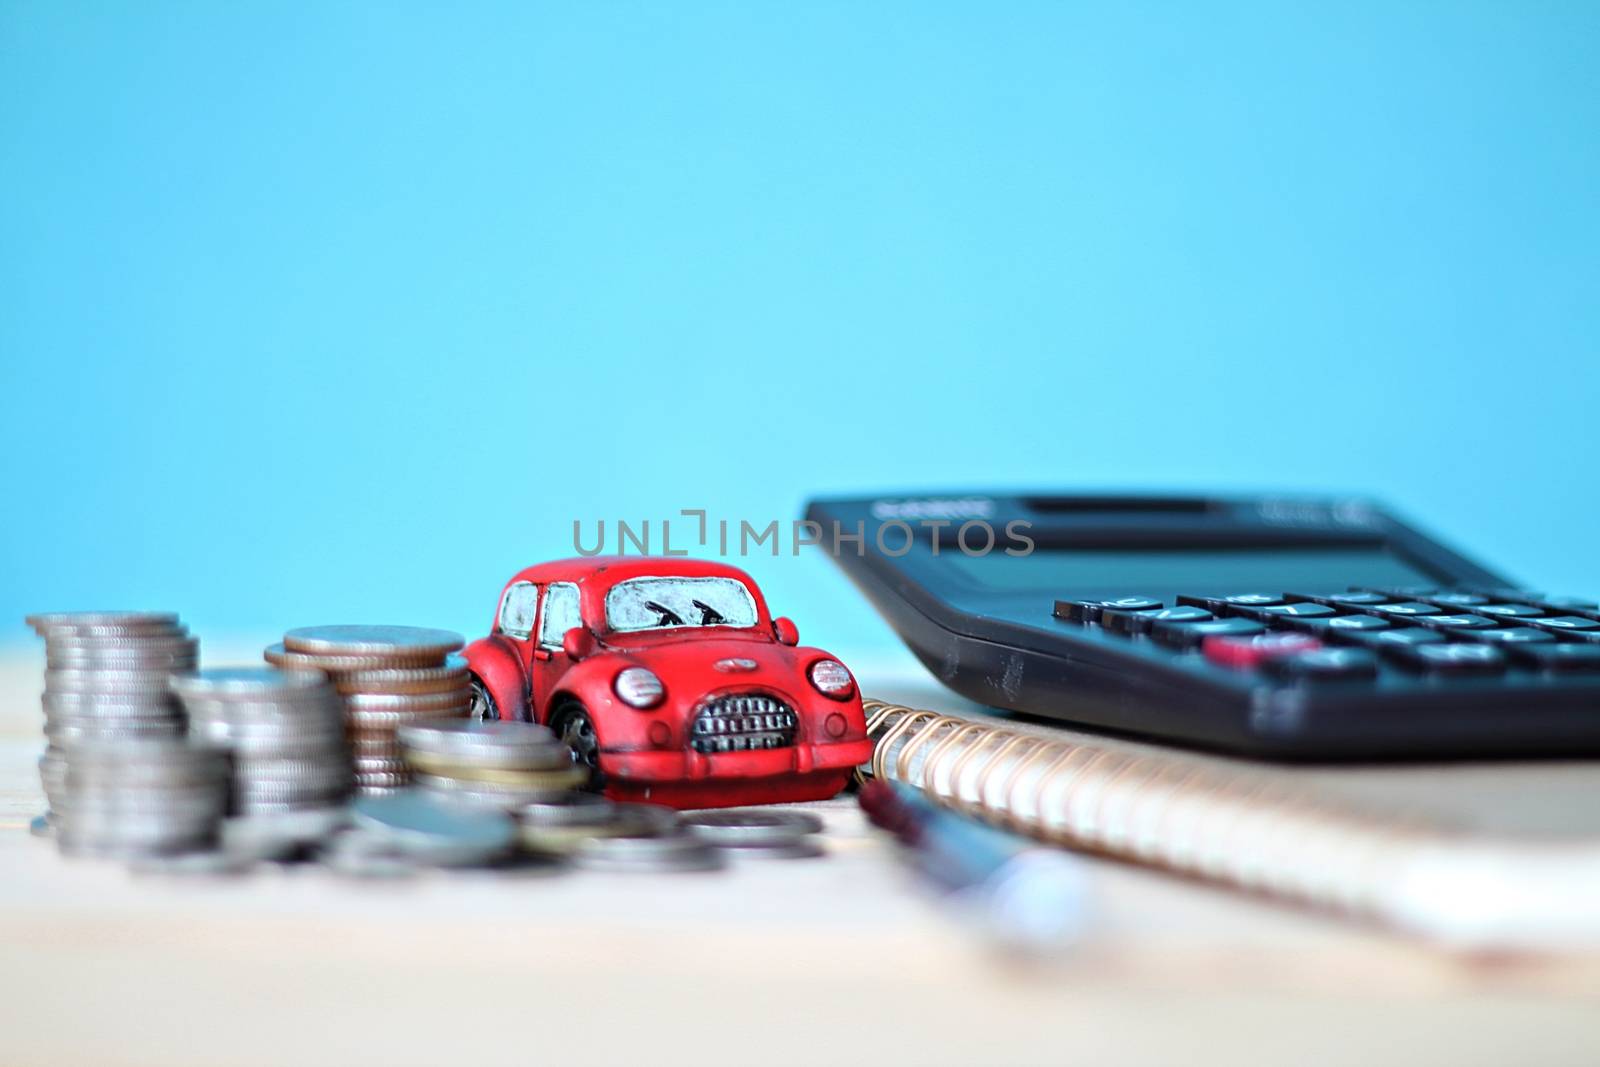 Business, finance, saving money or car loan concept : Miniature car model, coins stack, calculator and notebook paper on office desk table